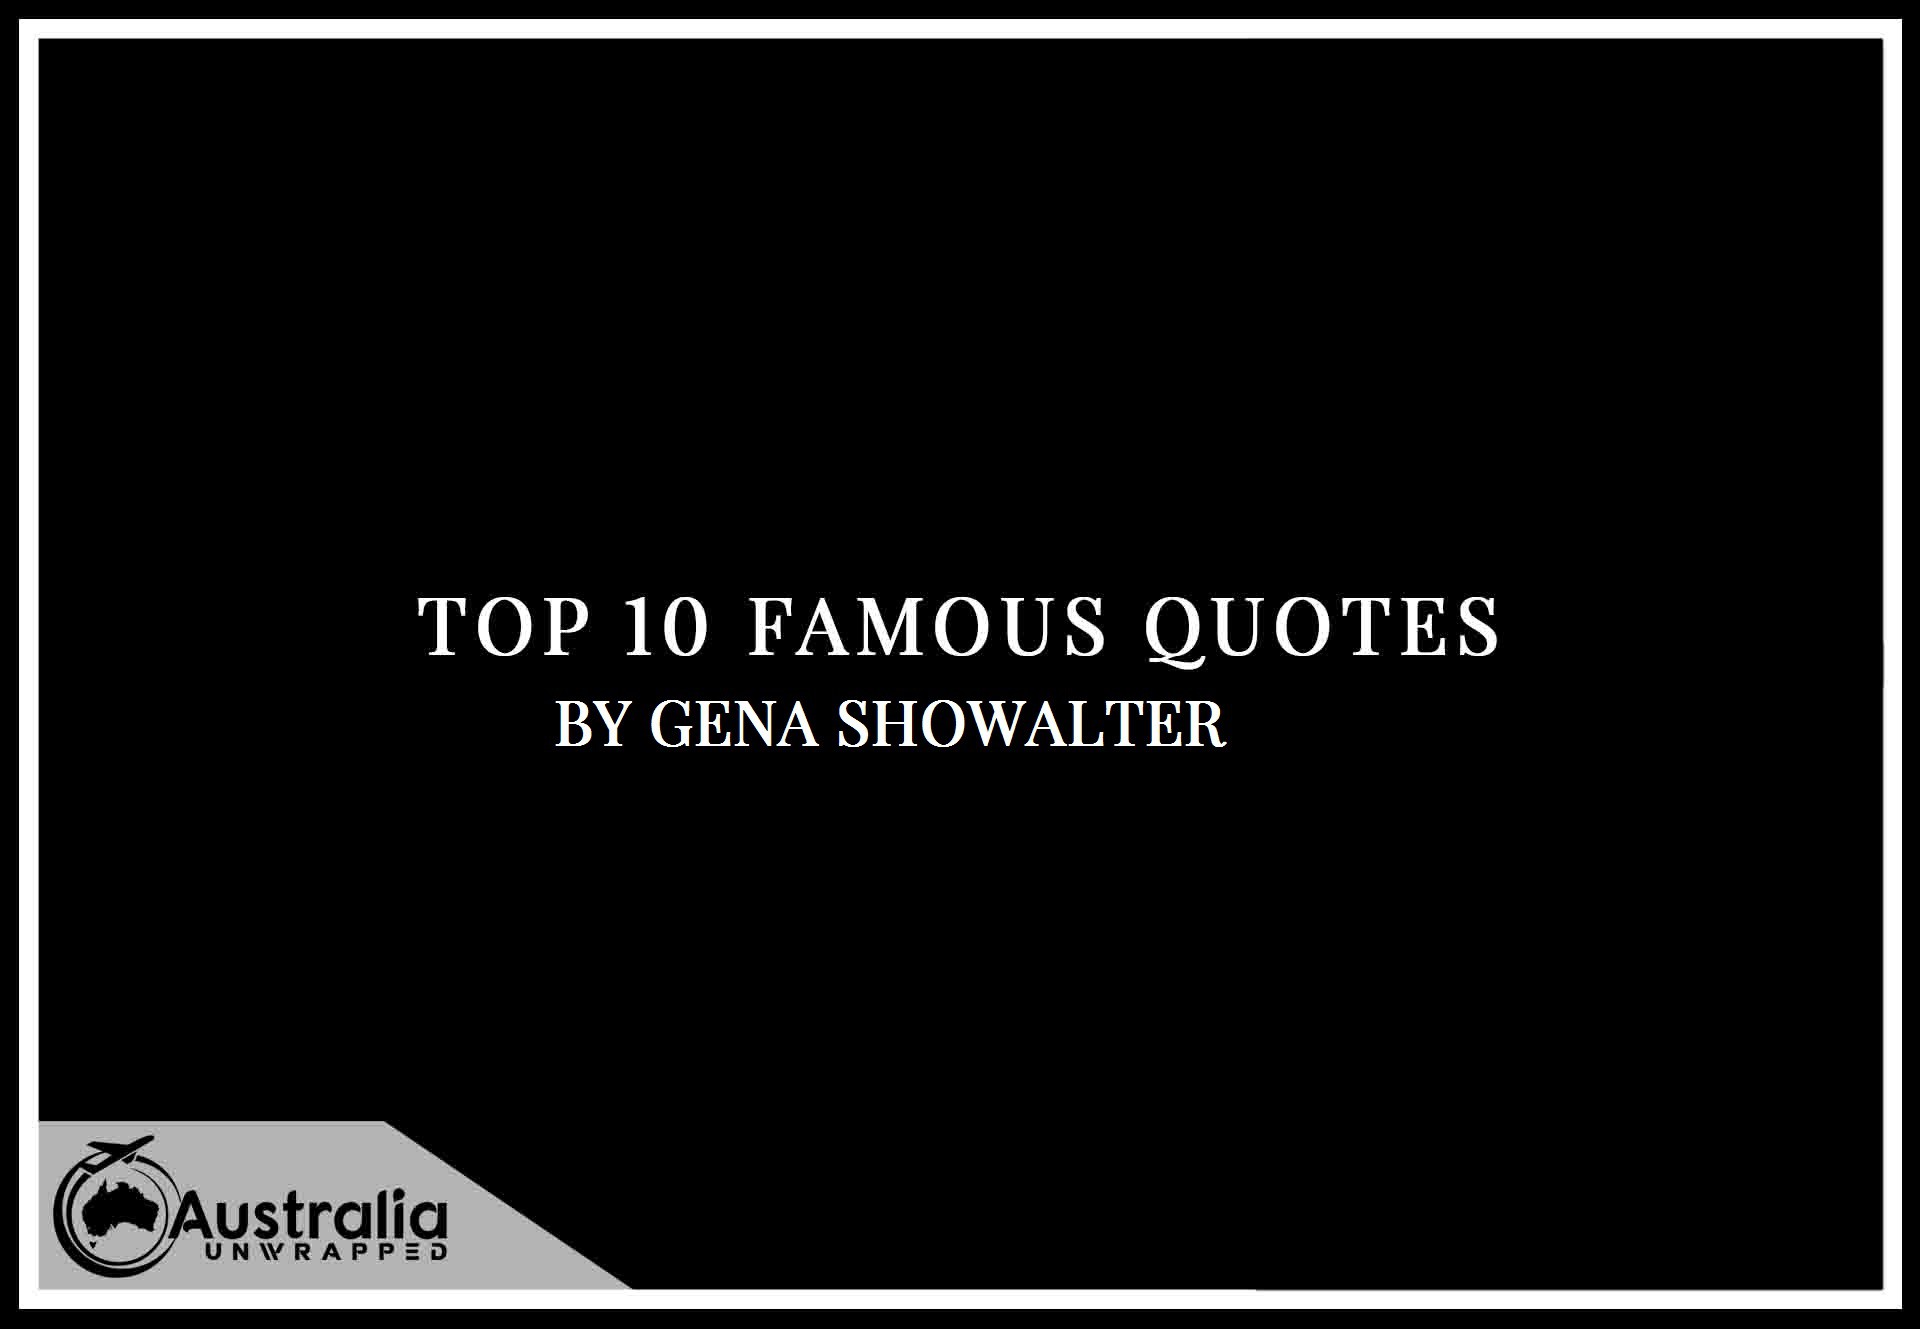 Gena Showalter’s Top 10 Popular and Famous Quotes